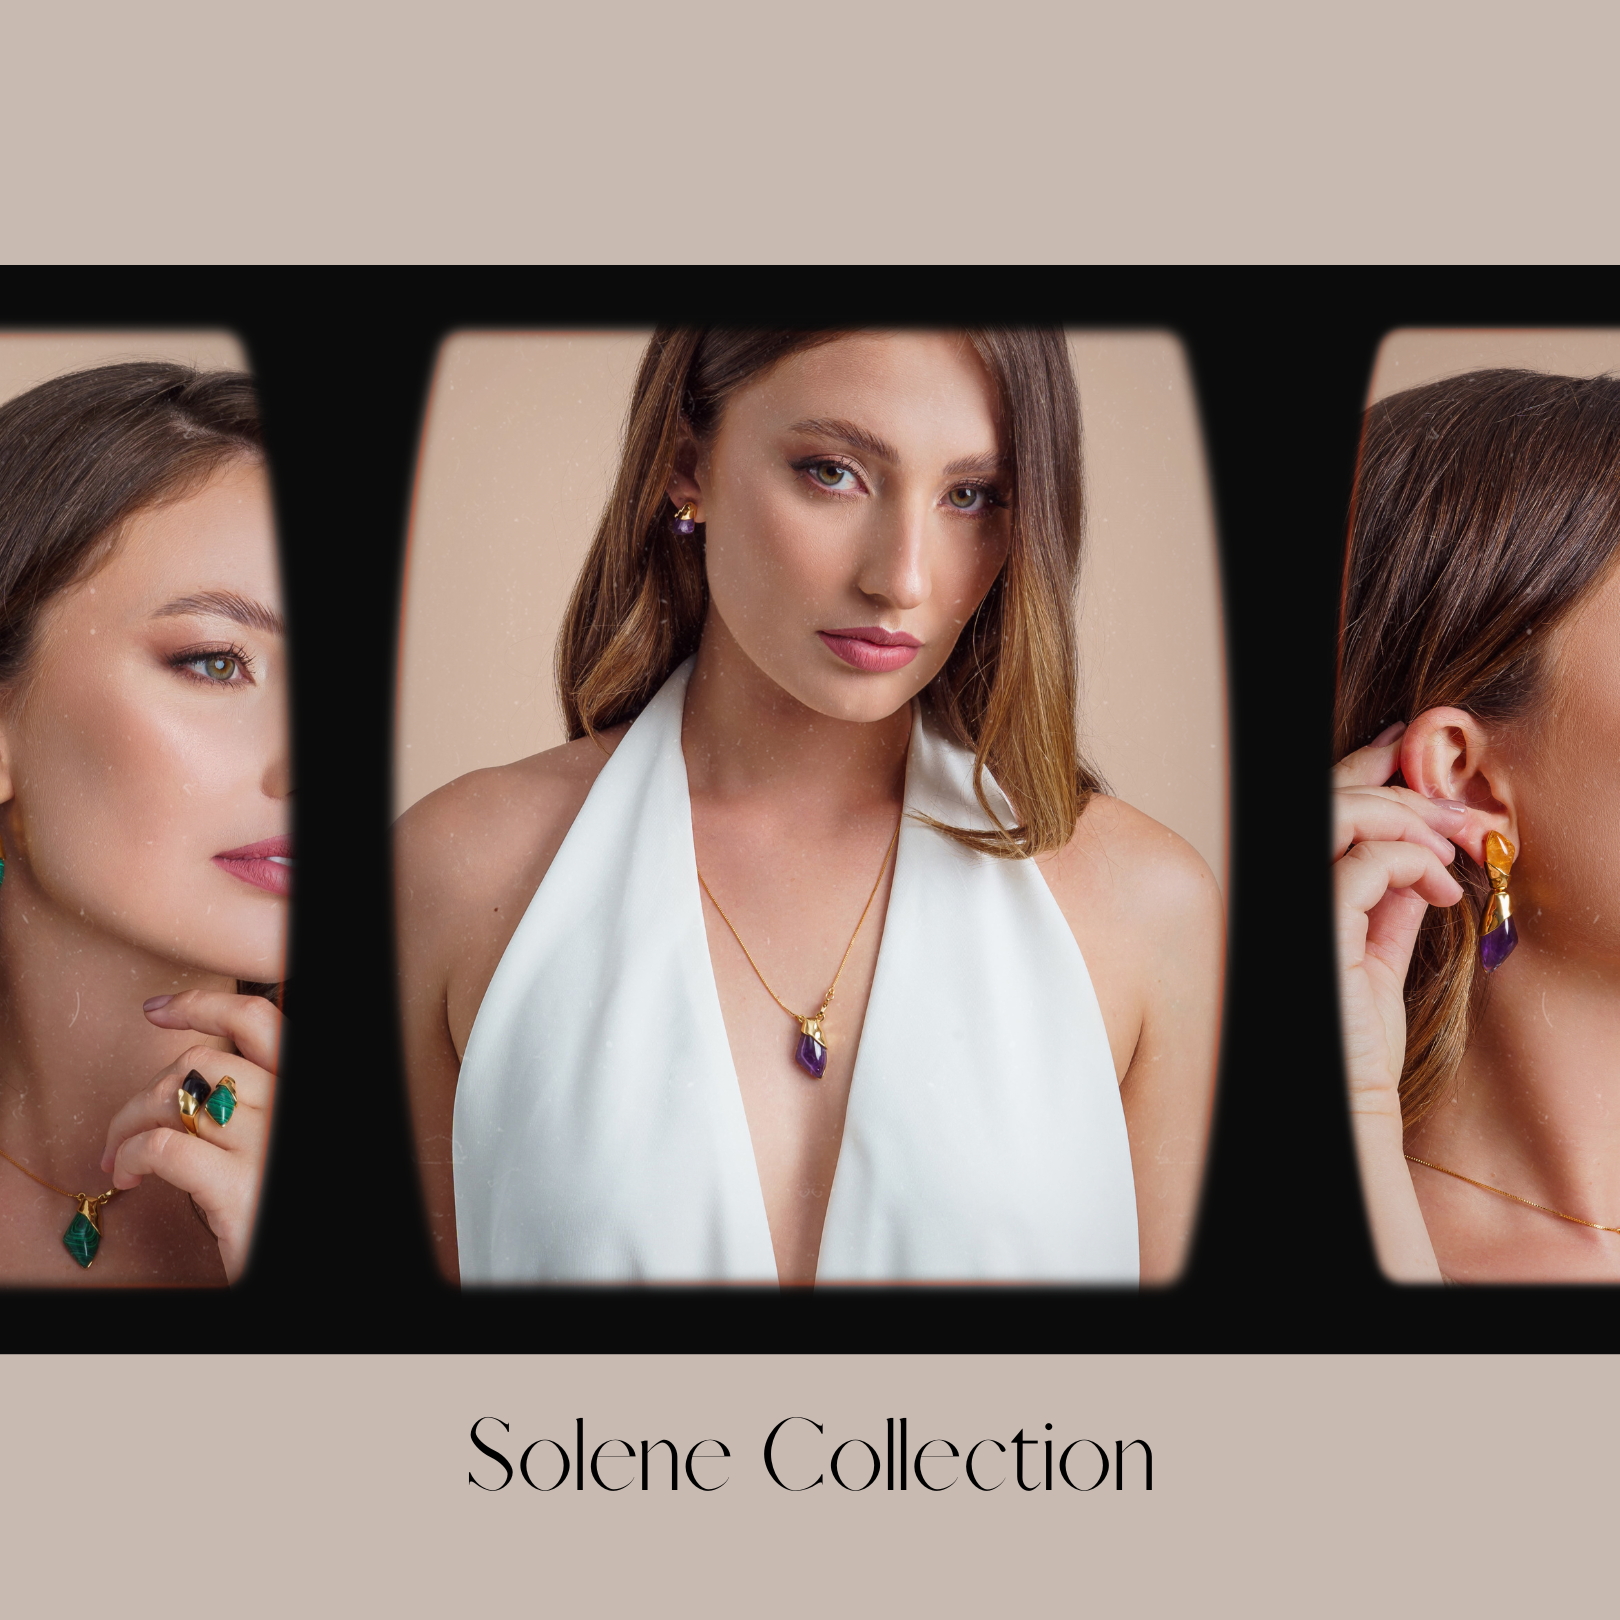 Solene Collection